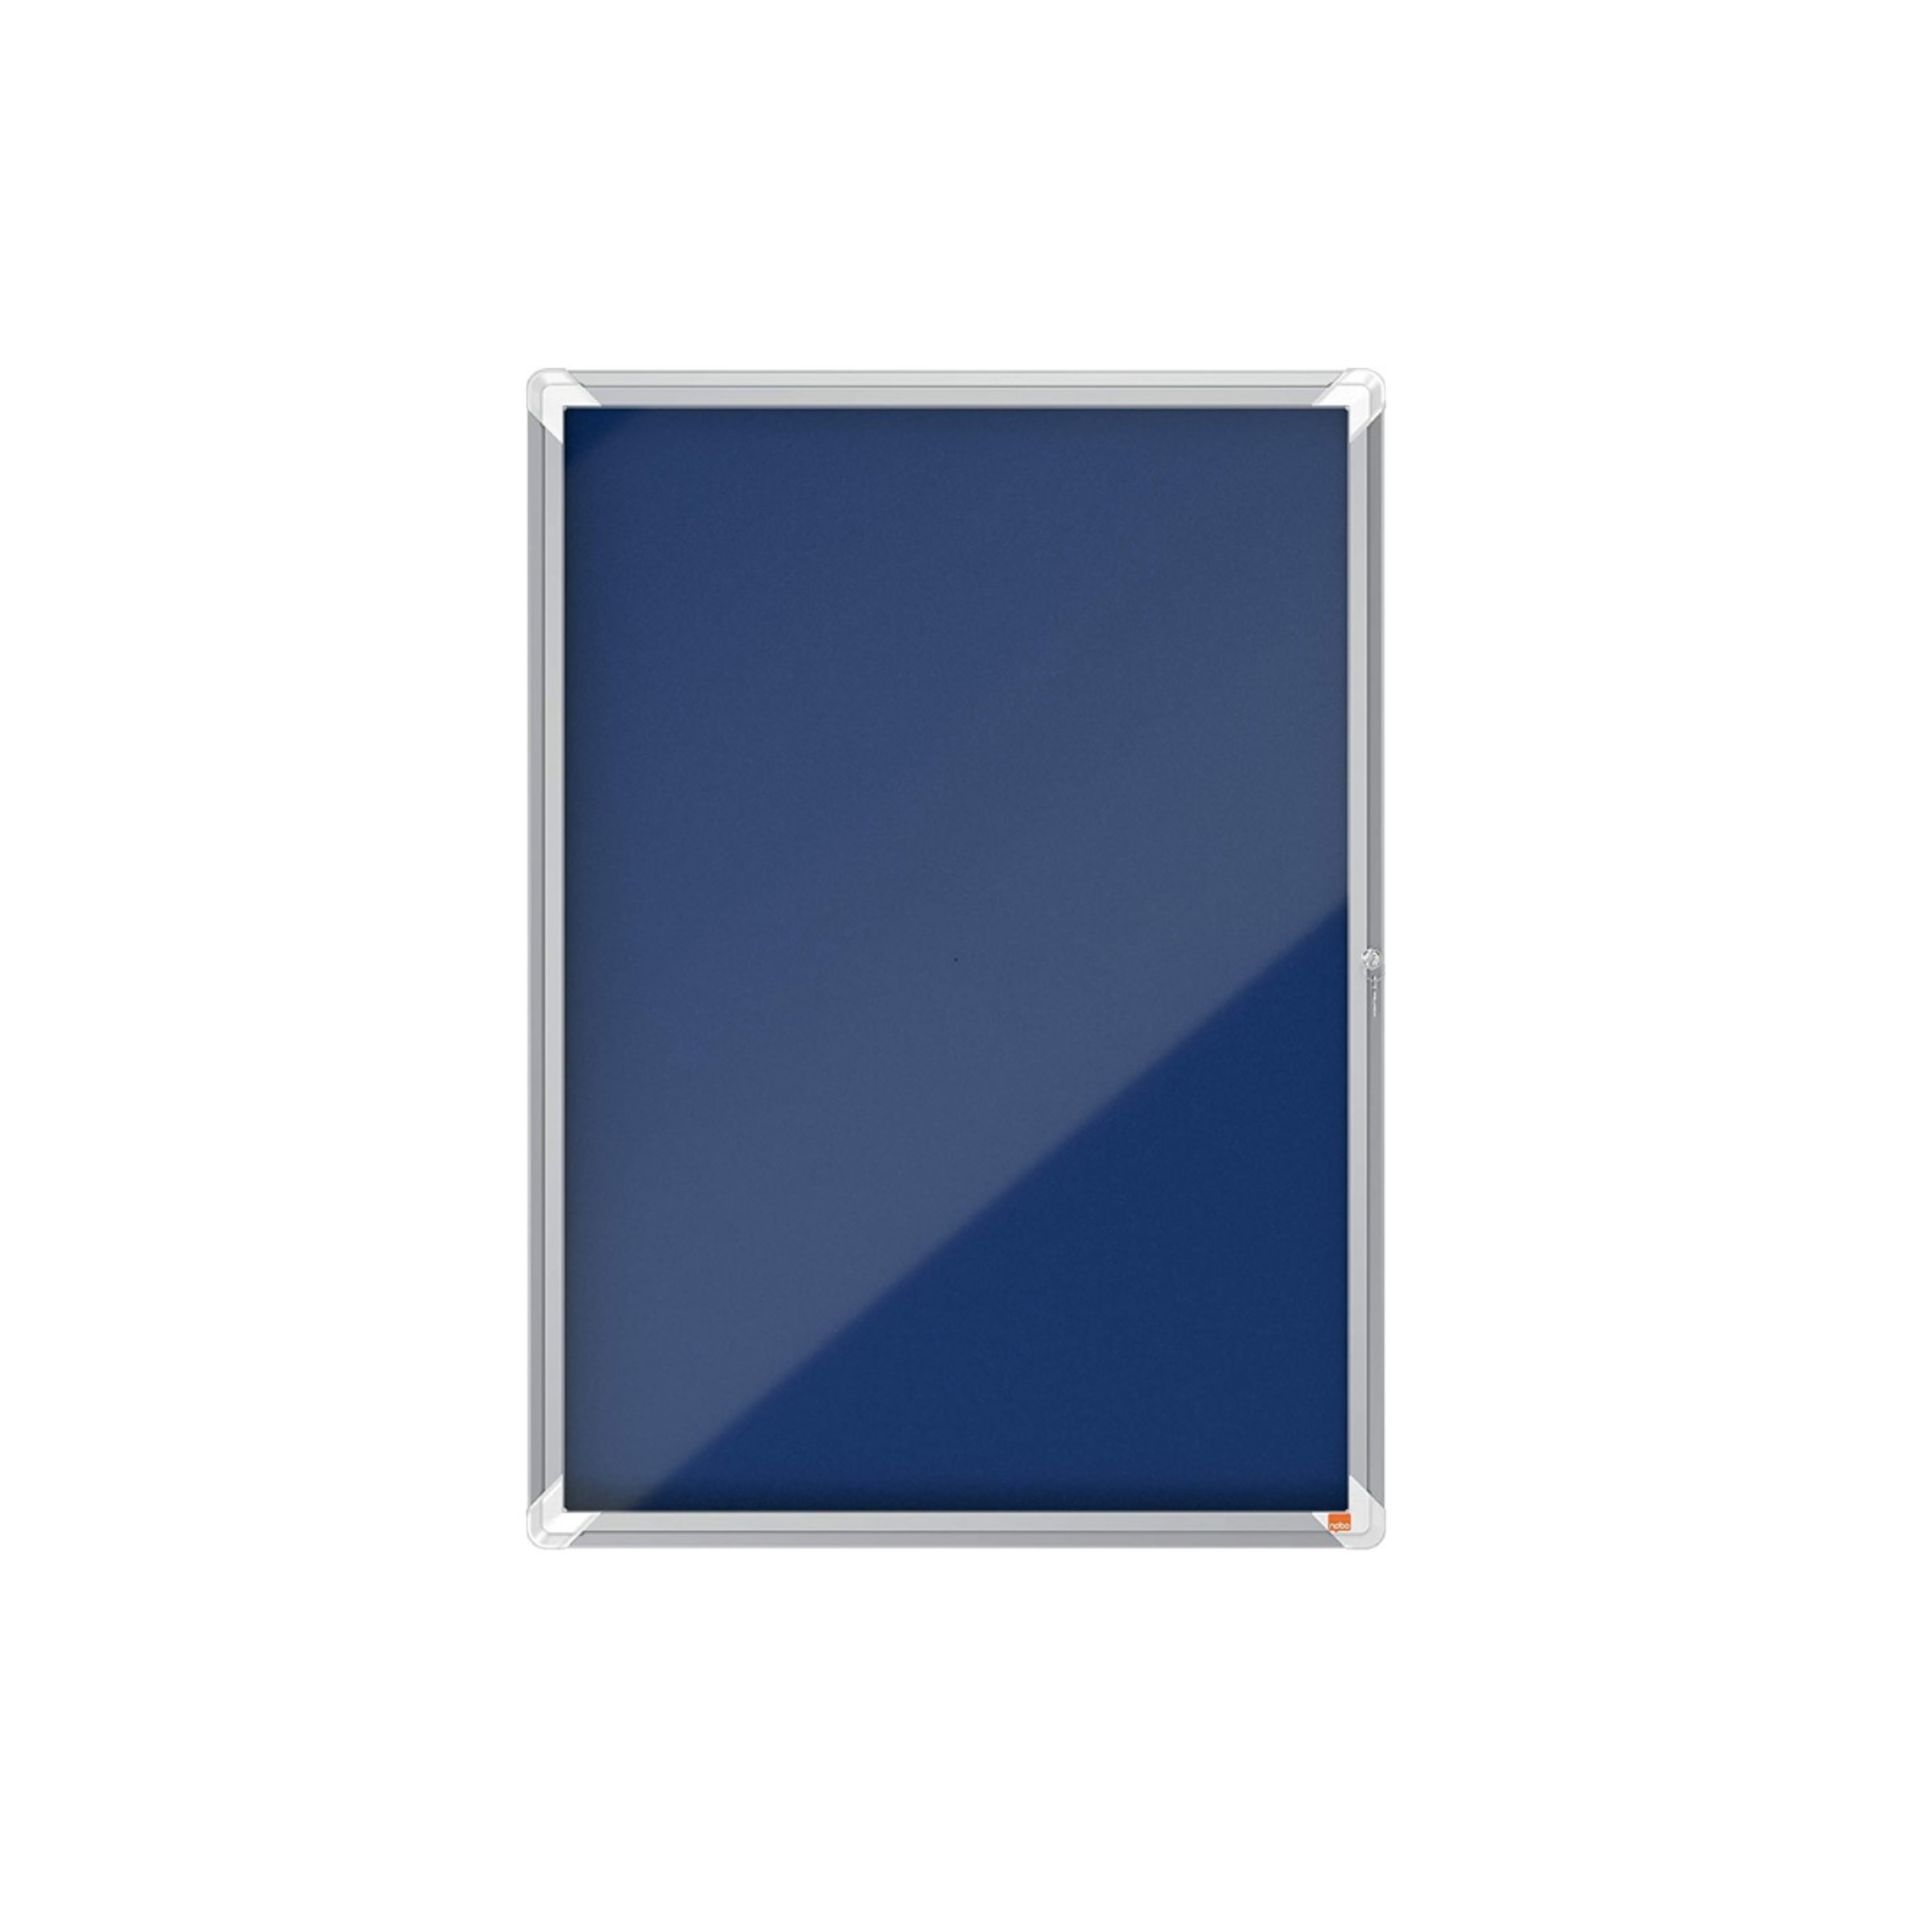 Nobo Pacific Internal Glazed Blue Felt Noticeboards 9 x A4 - Image 2 of 2